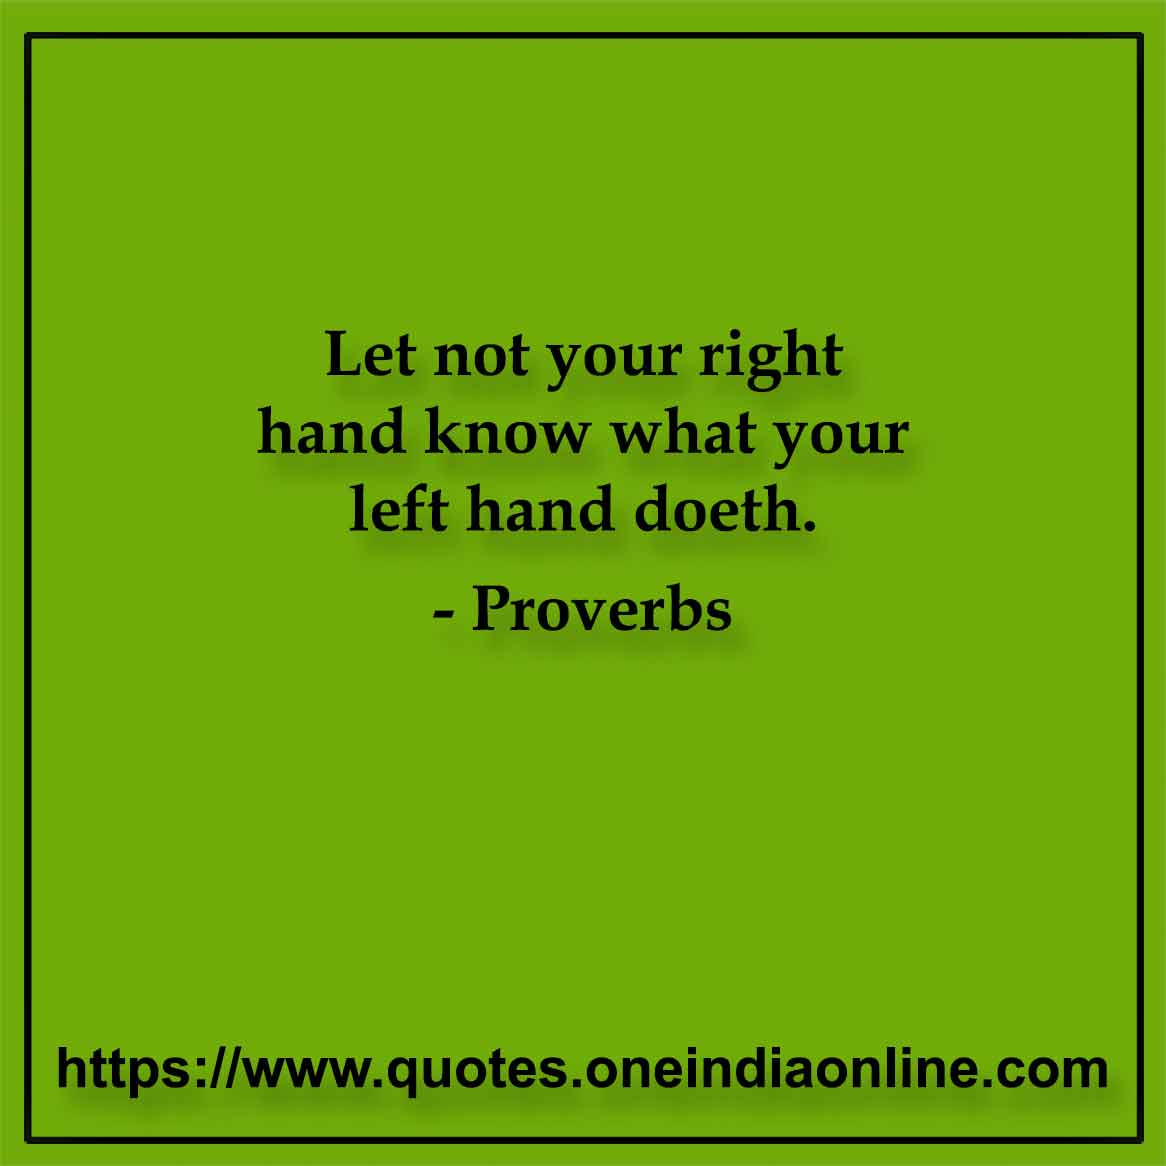 Let not your right hand know what your left hand doeth.

